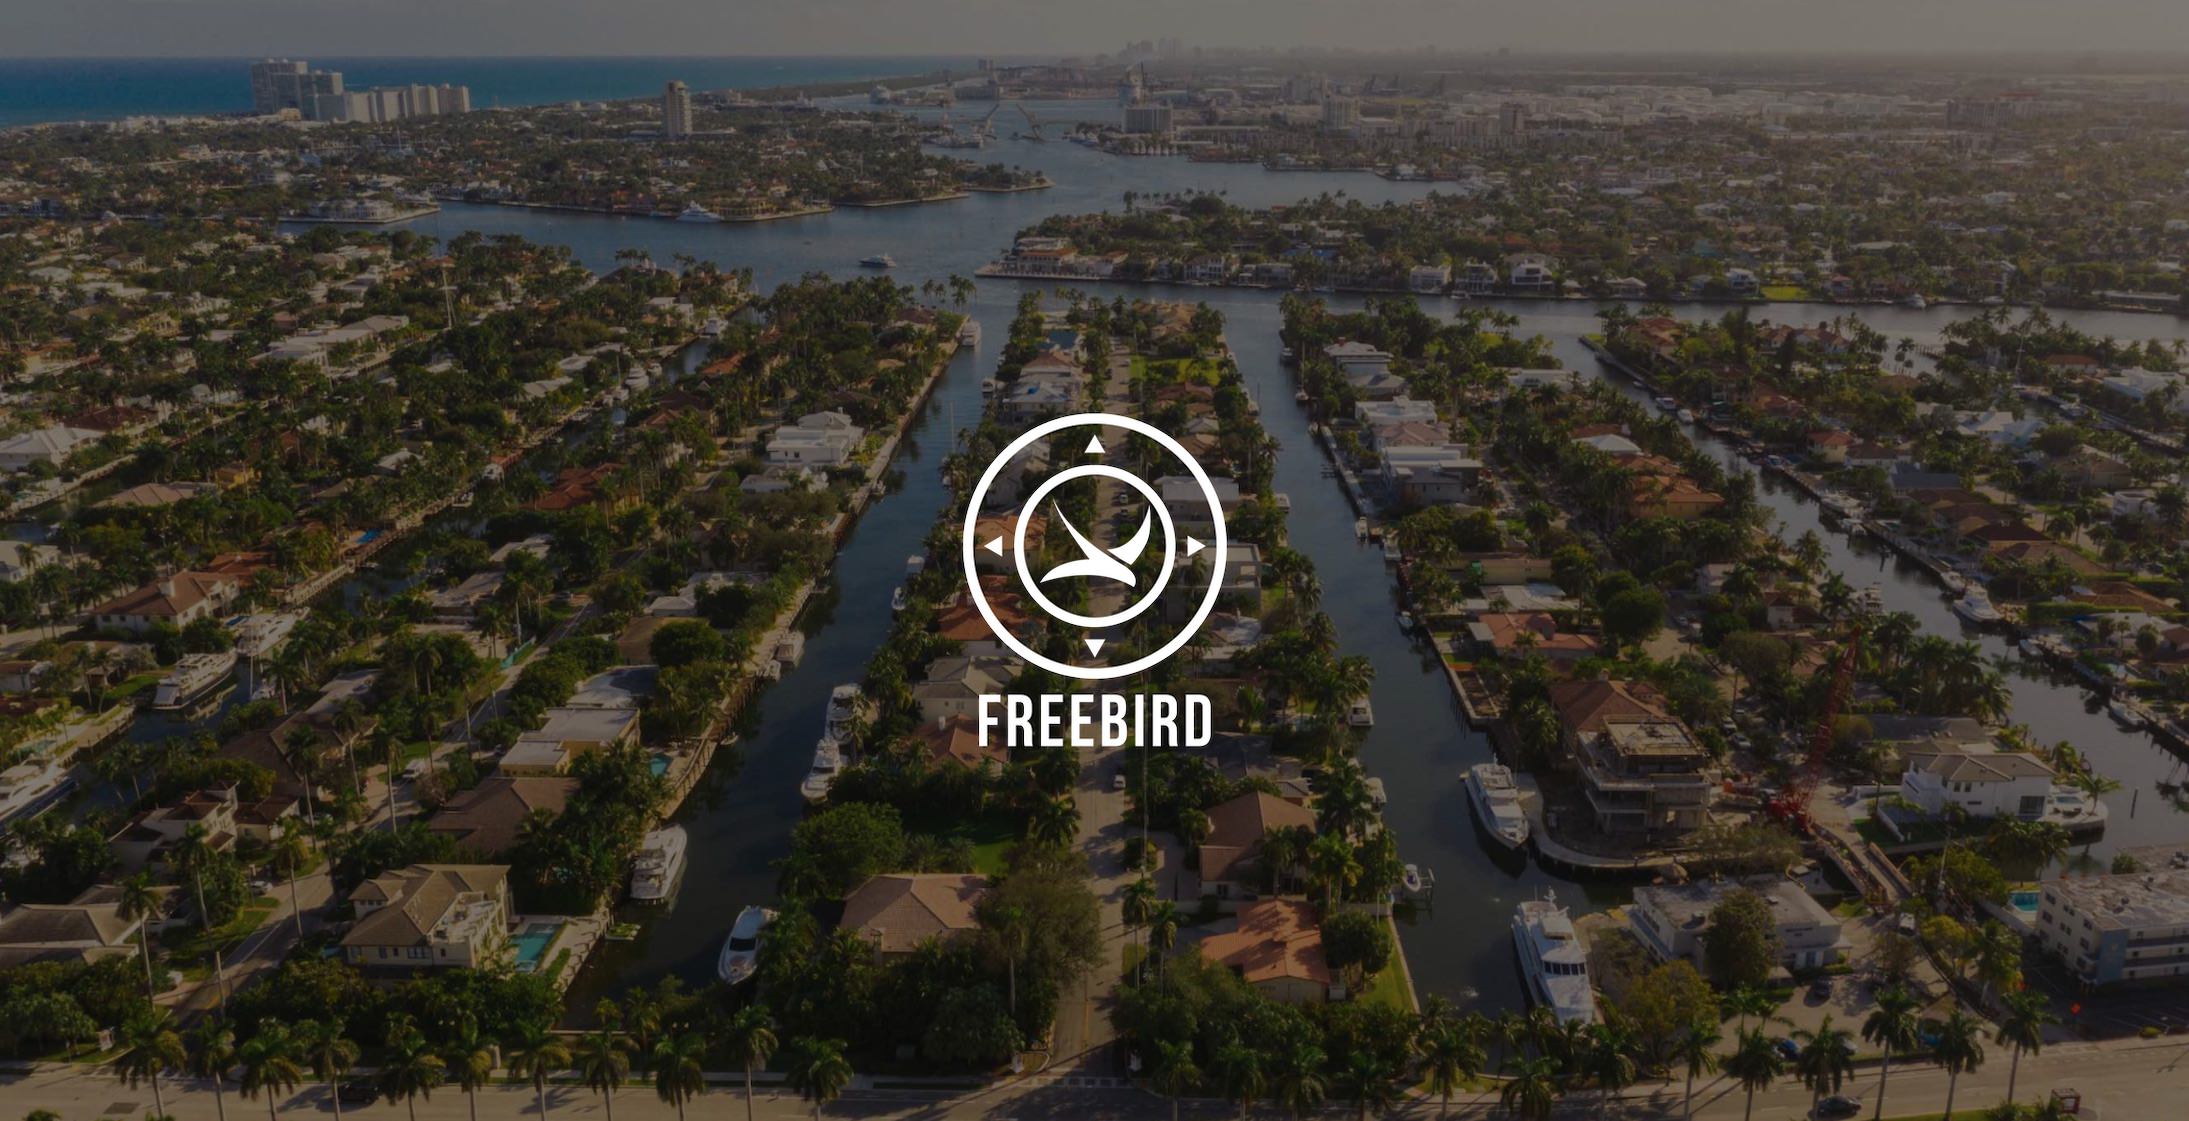 White FreeBird logo on background of canals with boats in a city